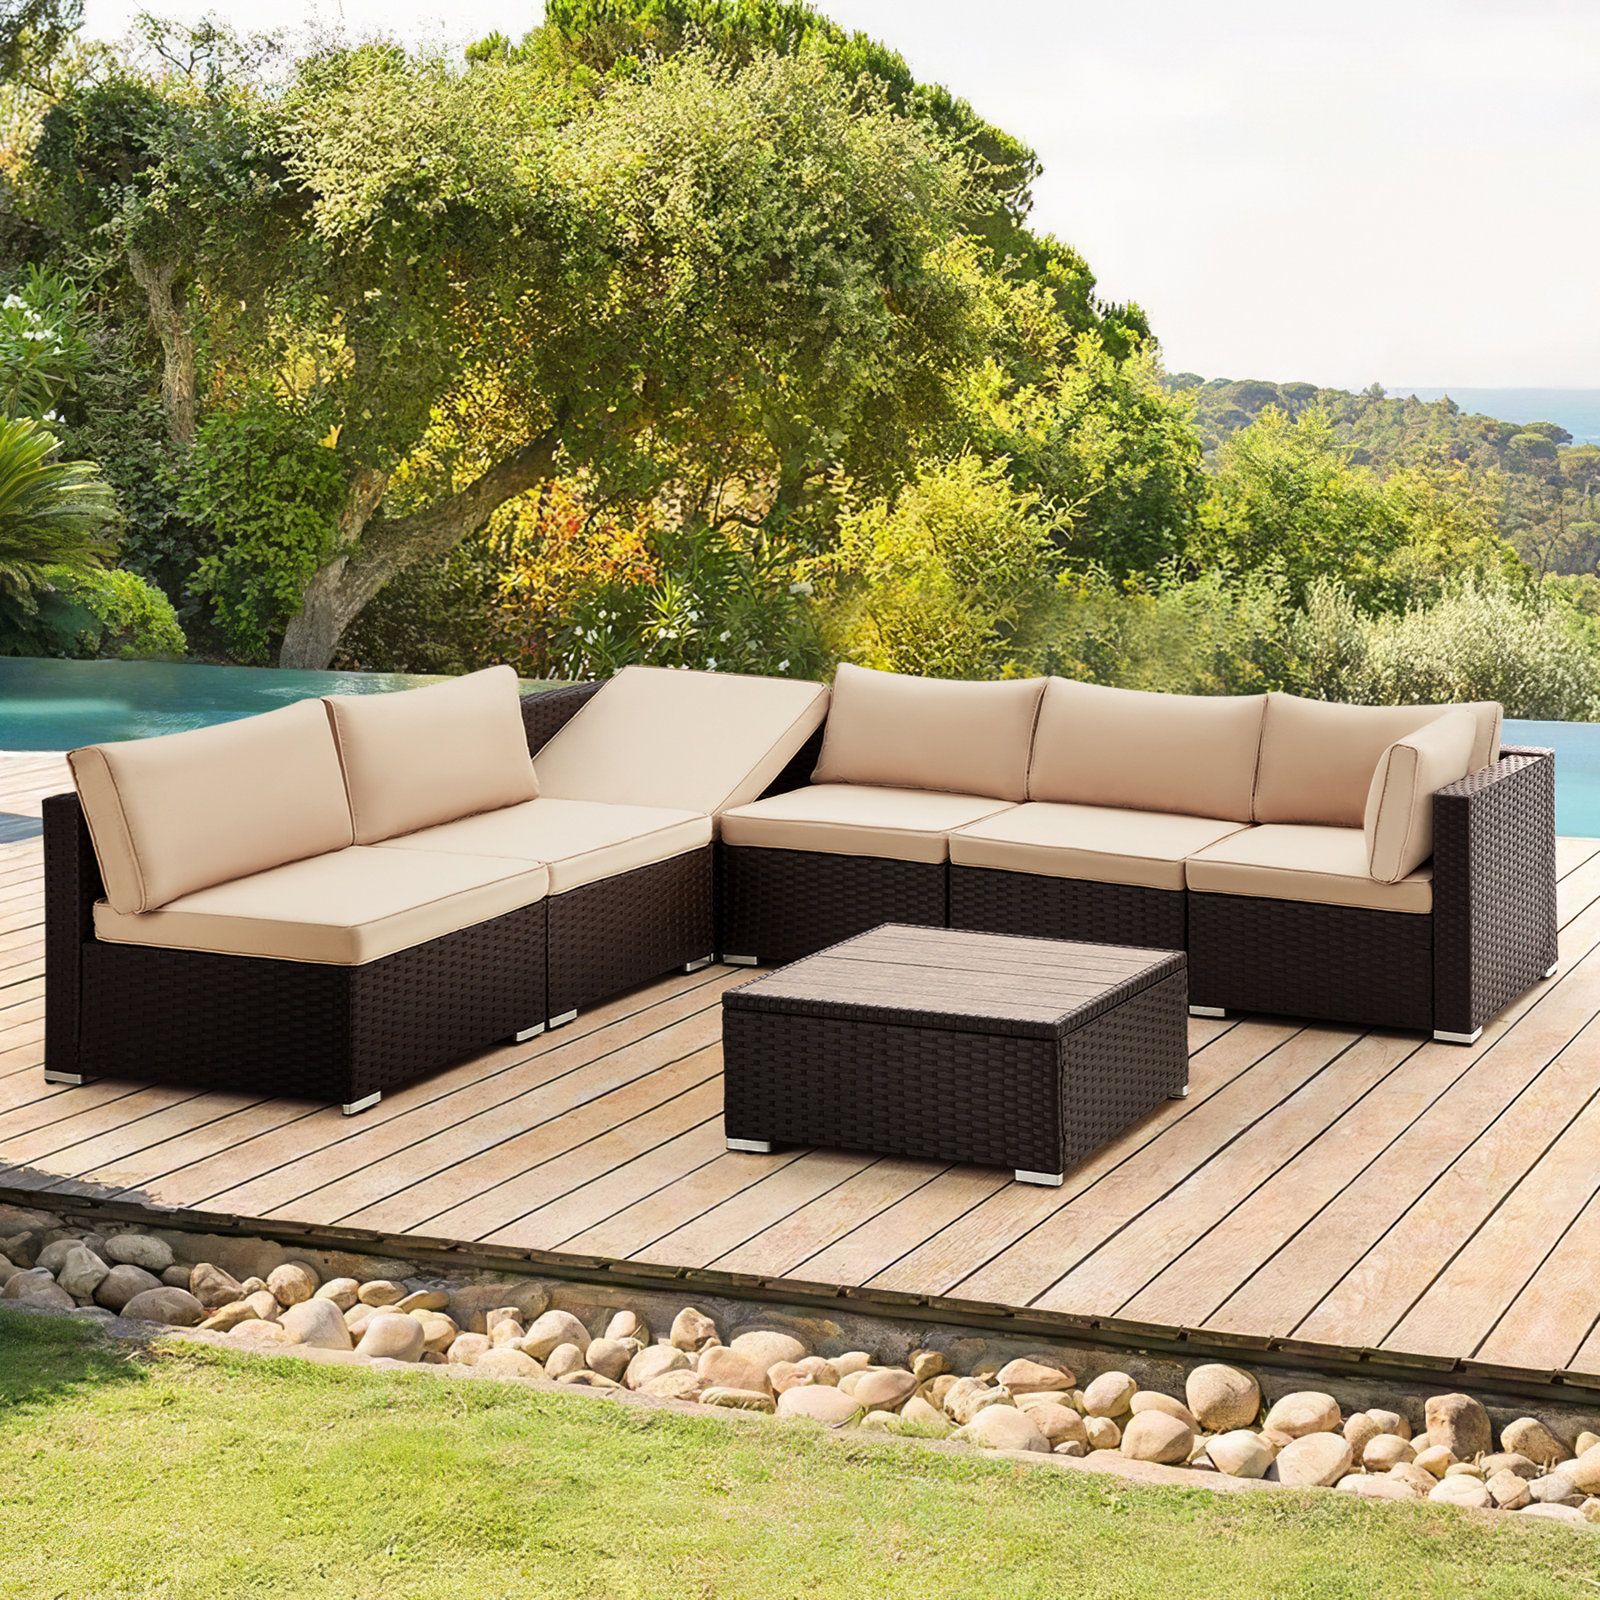 Ashleh Outdoor Wicker Patio Sectional